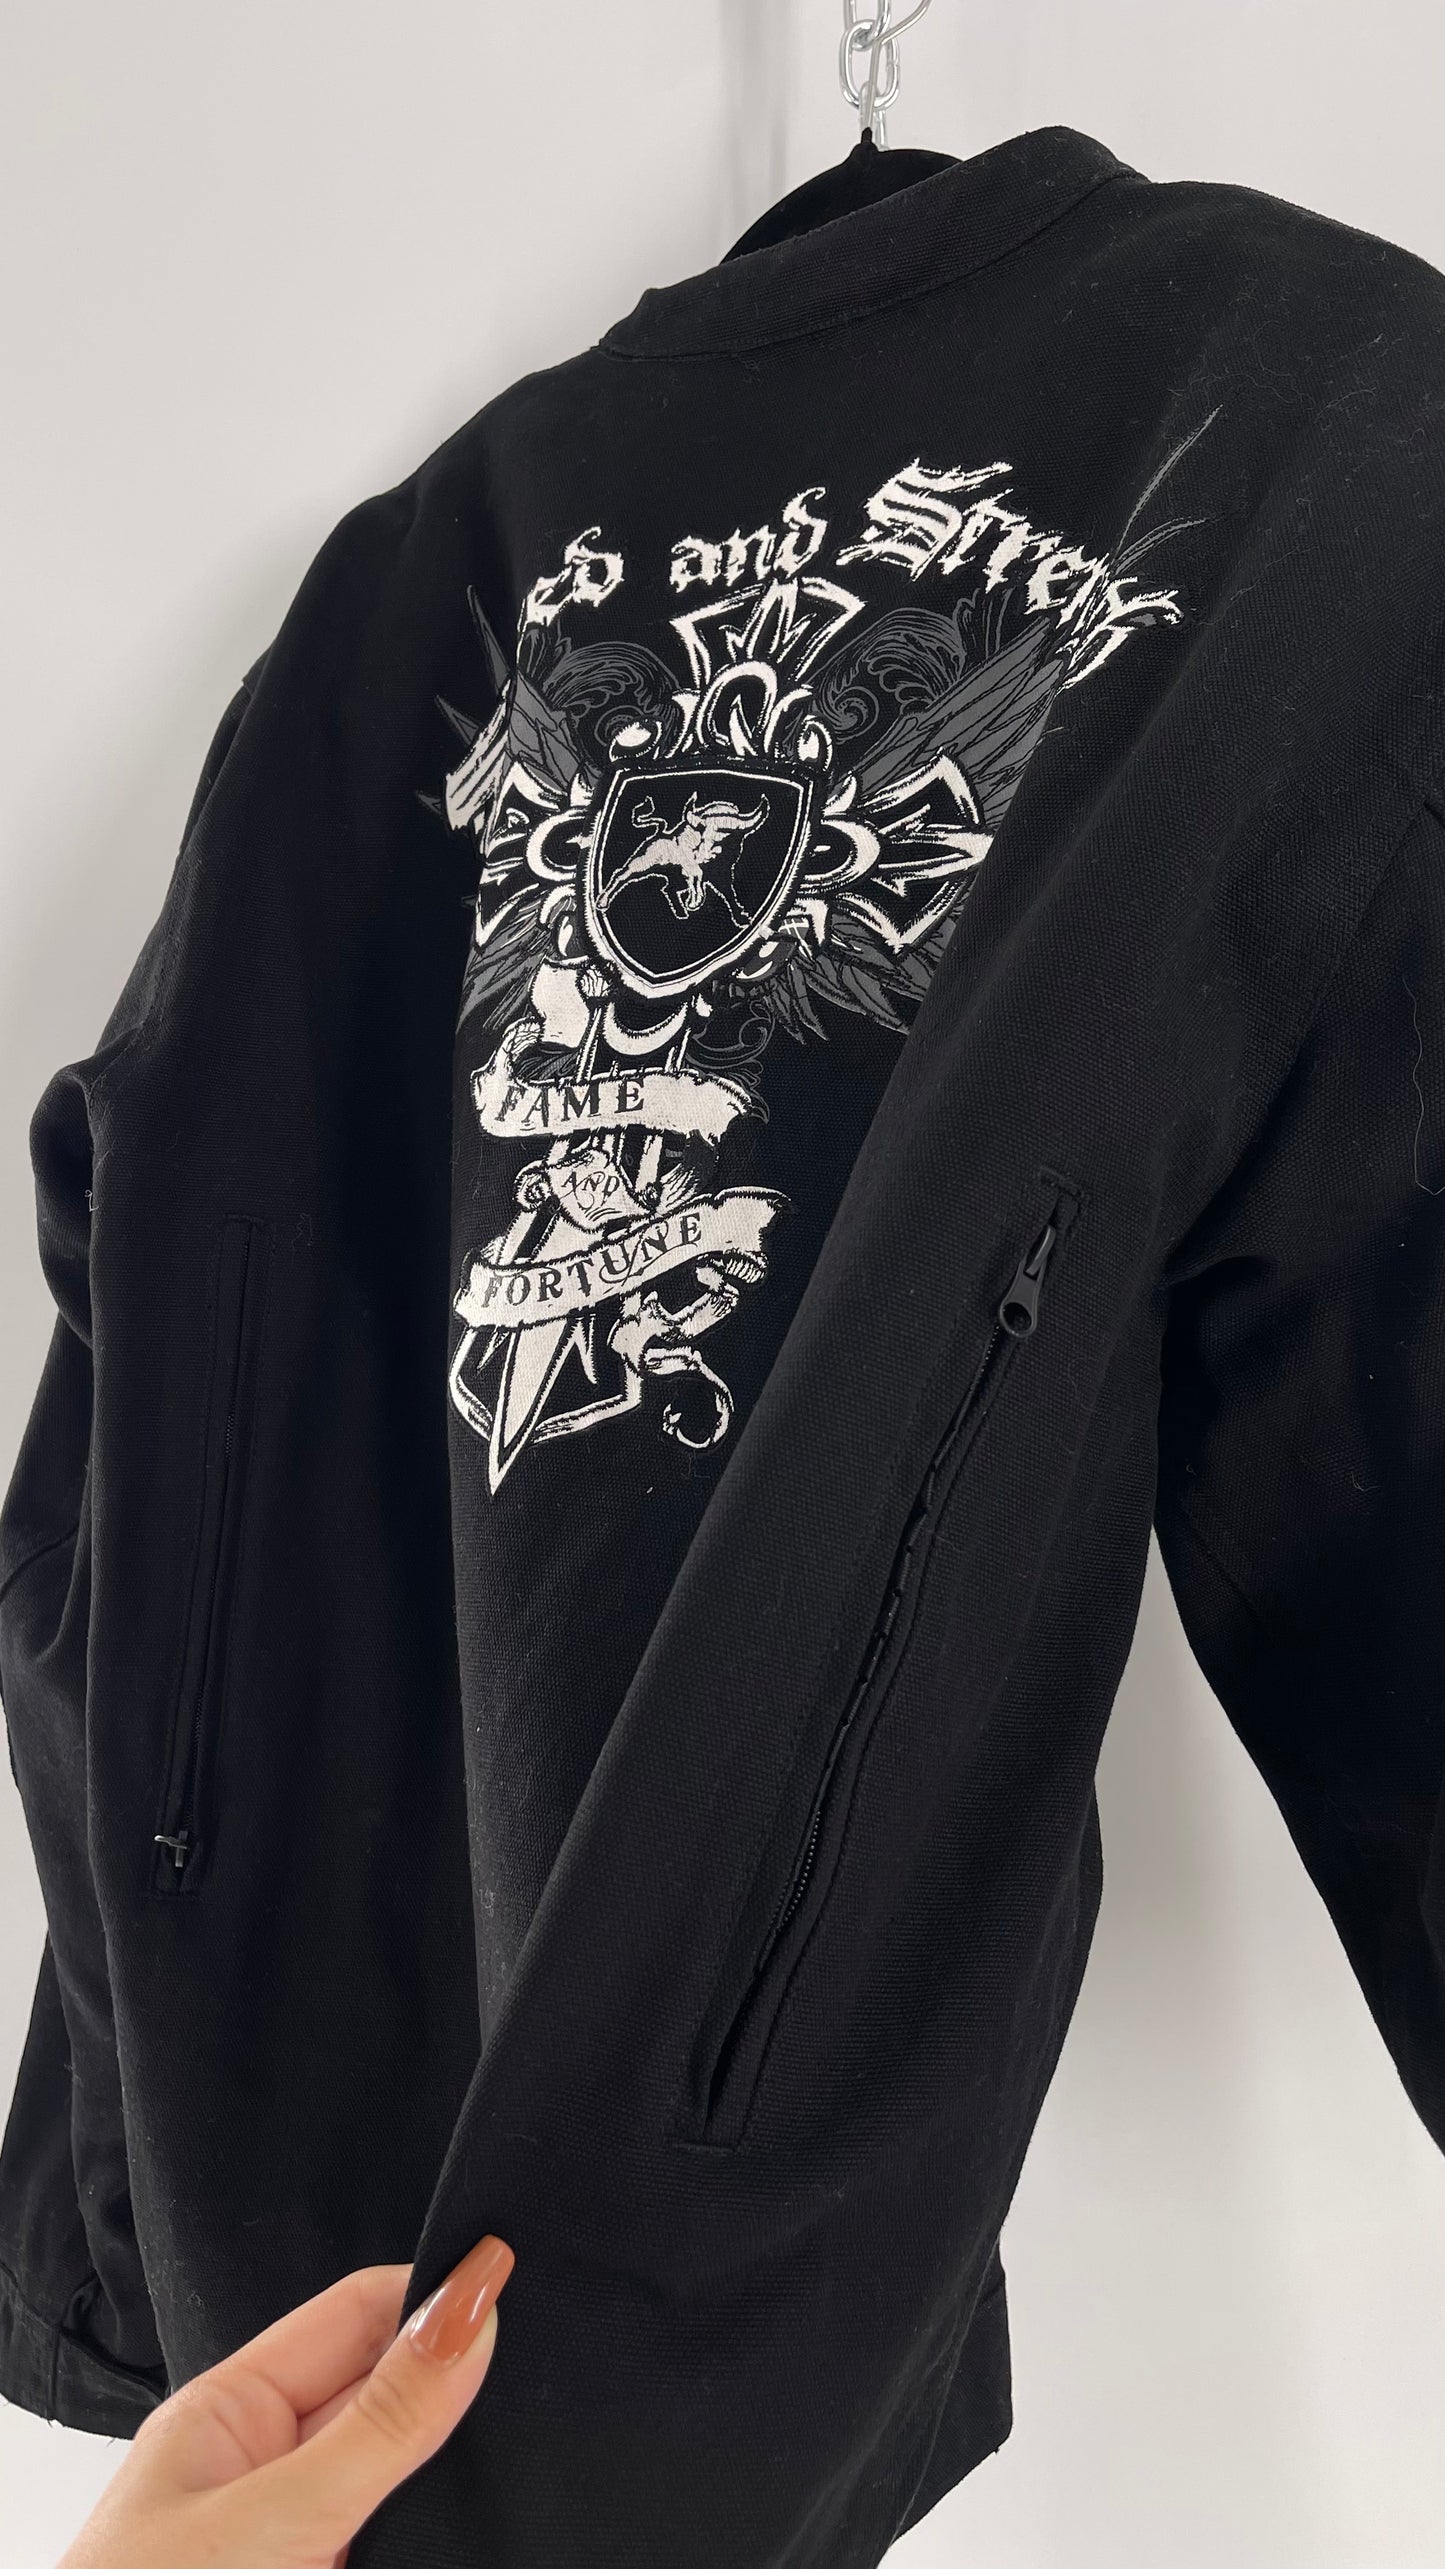 Vintage Speed + Strength Grunge Punk Riding Motorcycle Jacket with Cross Embroidery, Wings, Fame + Fortune, Speed + Strength Men’s Unisex (XXL)